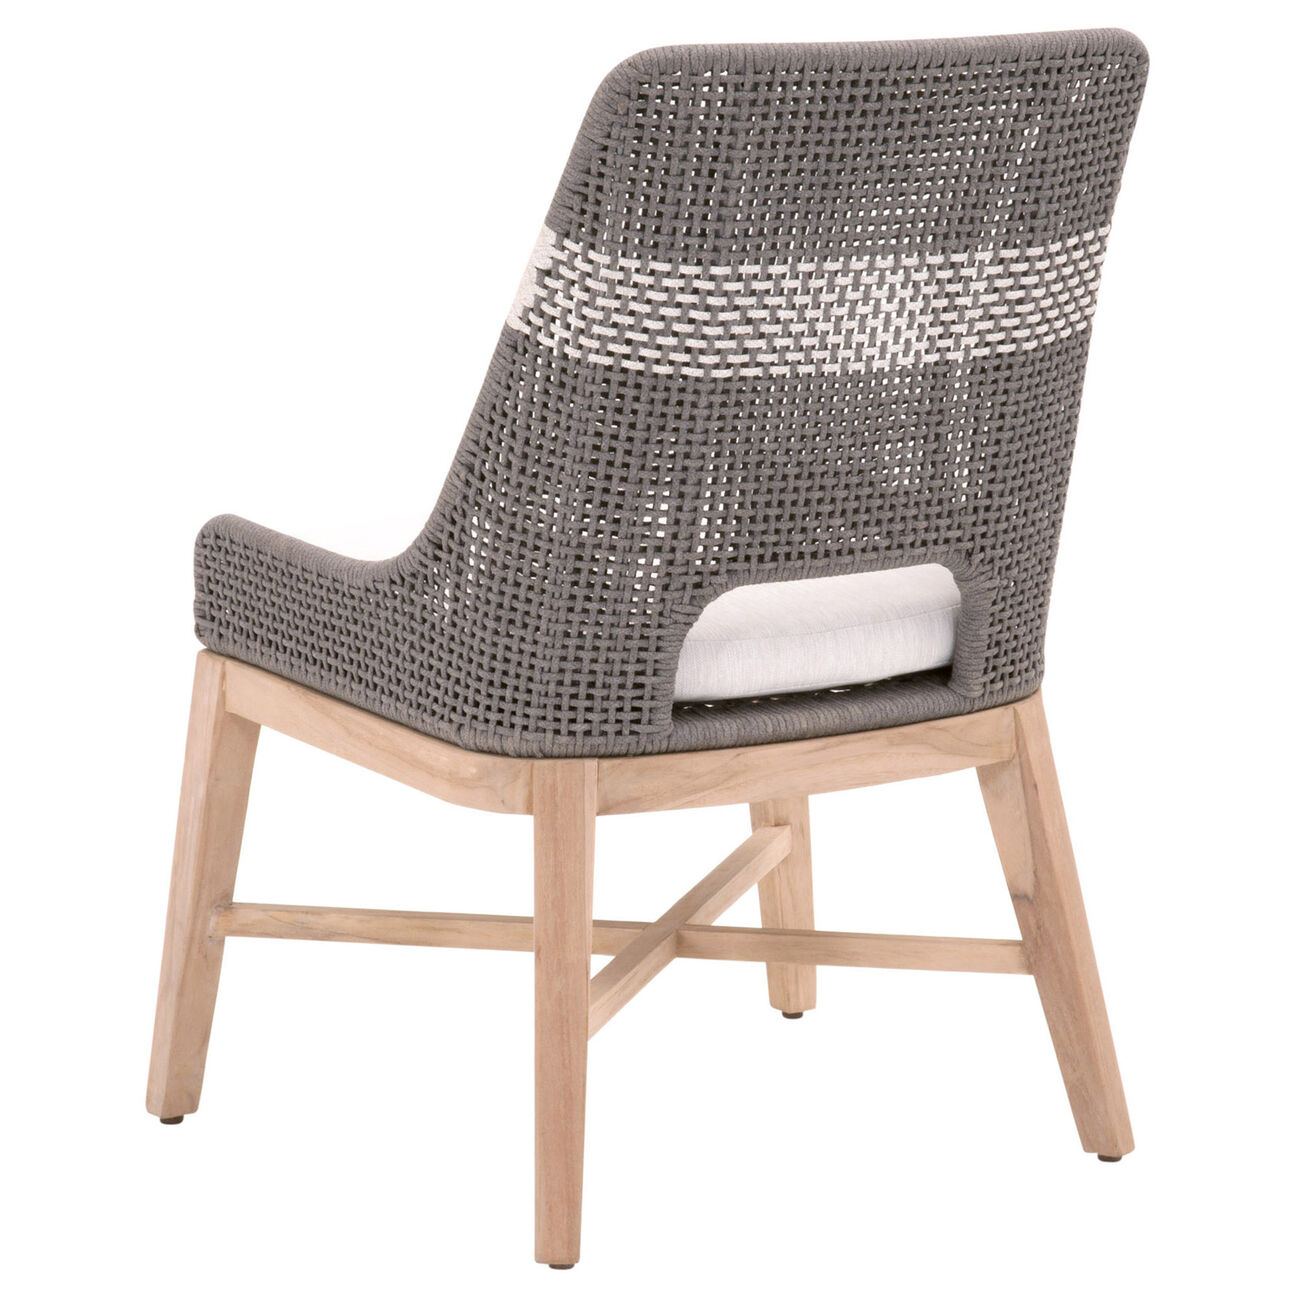 Interwoven Rope Dining Chair with X Shaped Support, Set of 2, Dark Gray